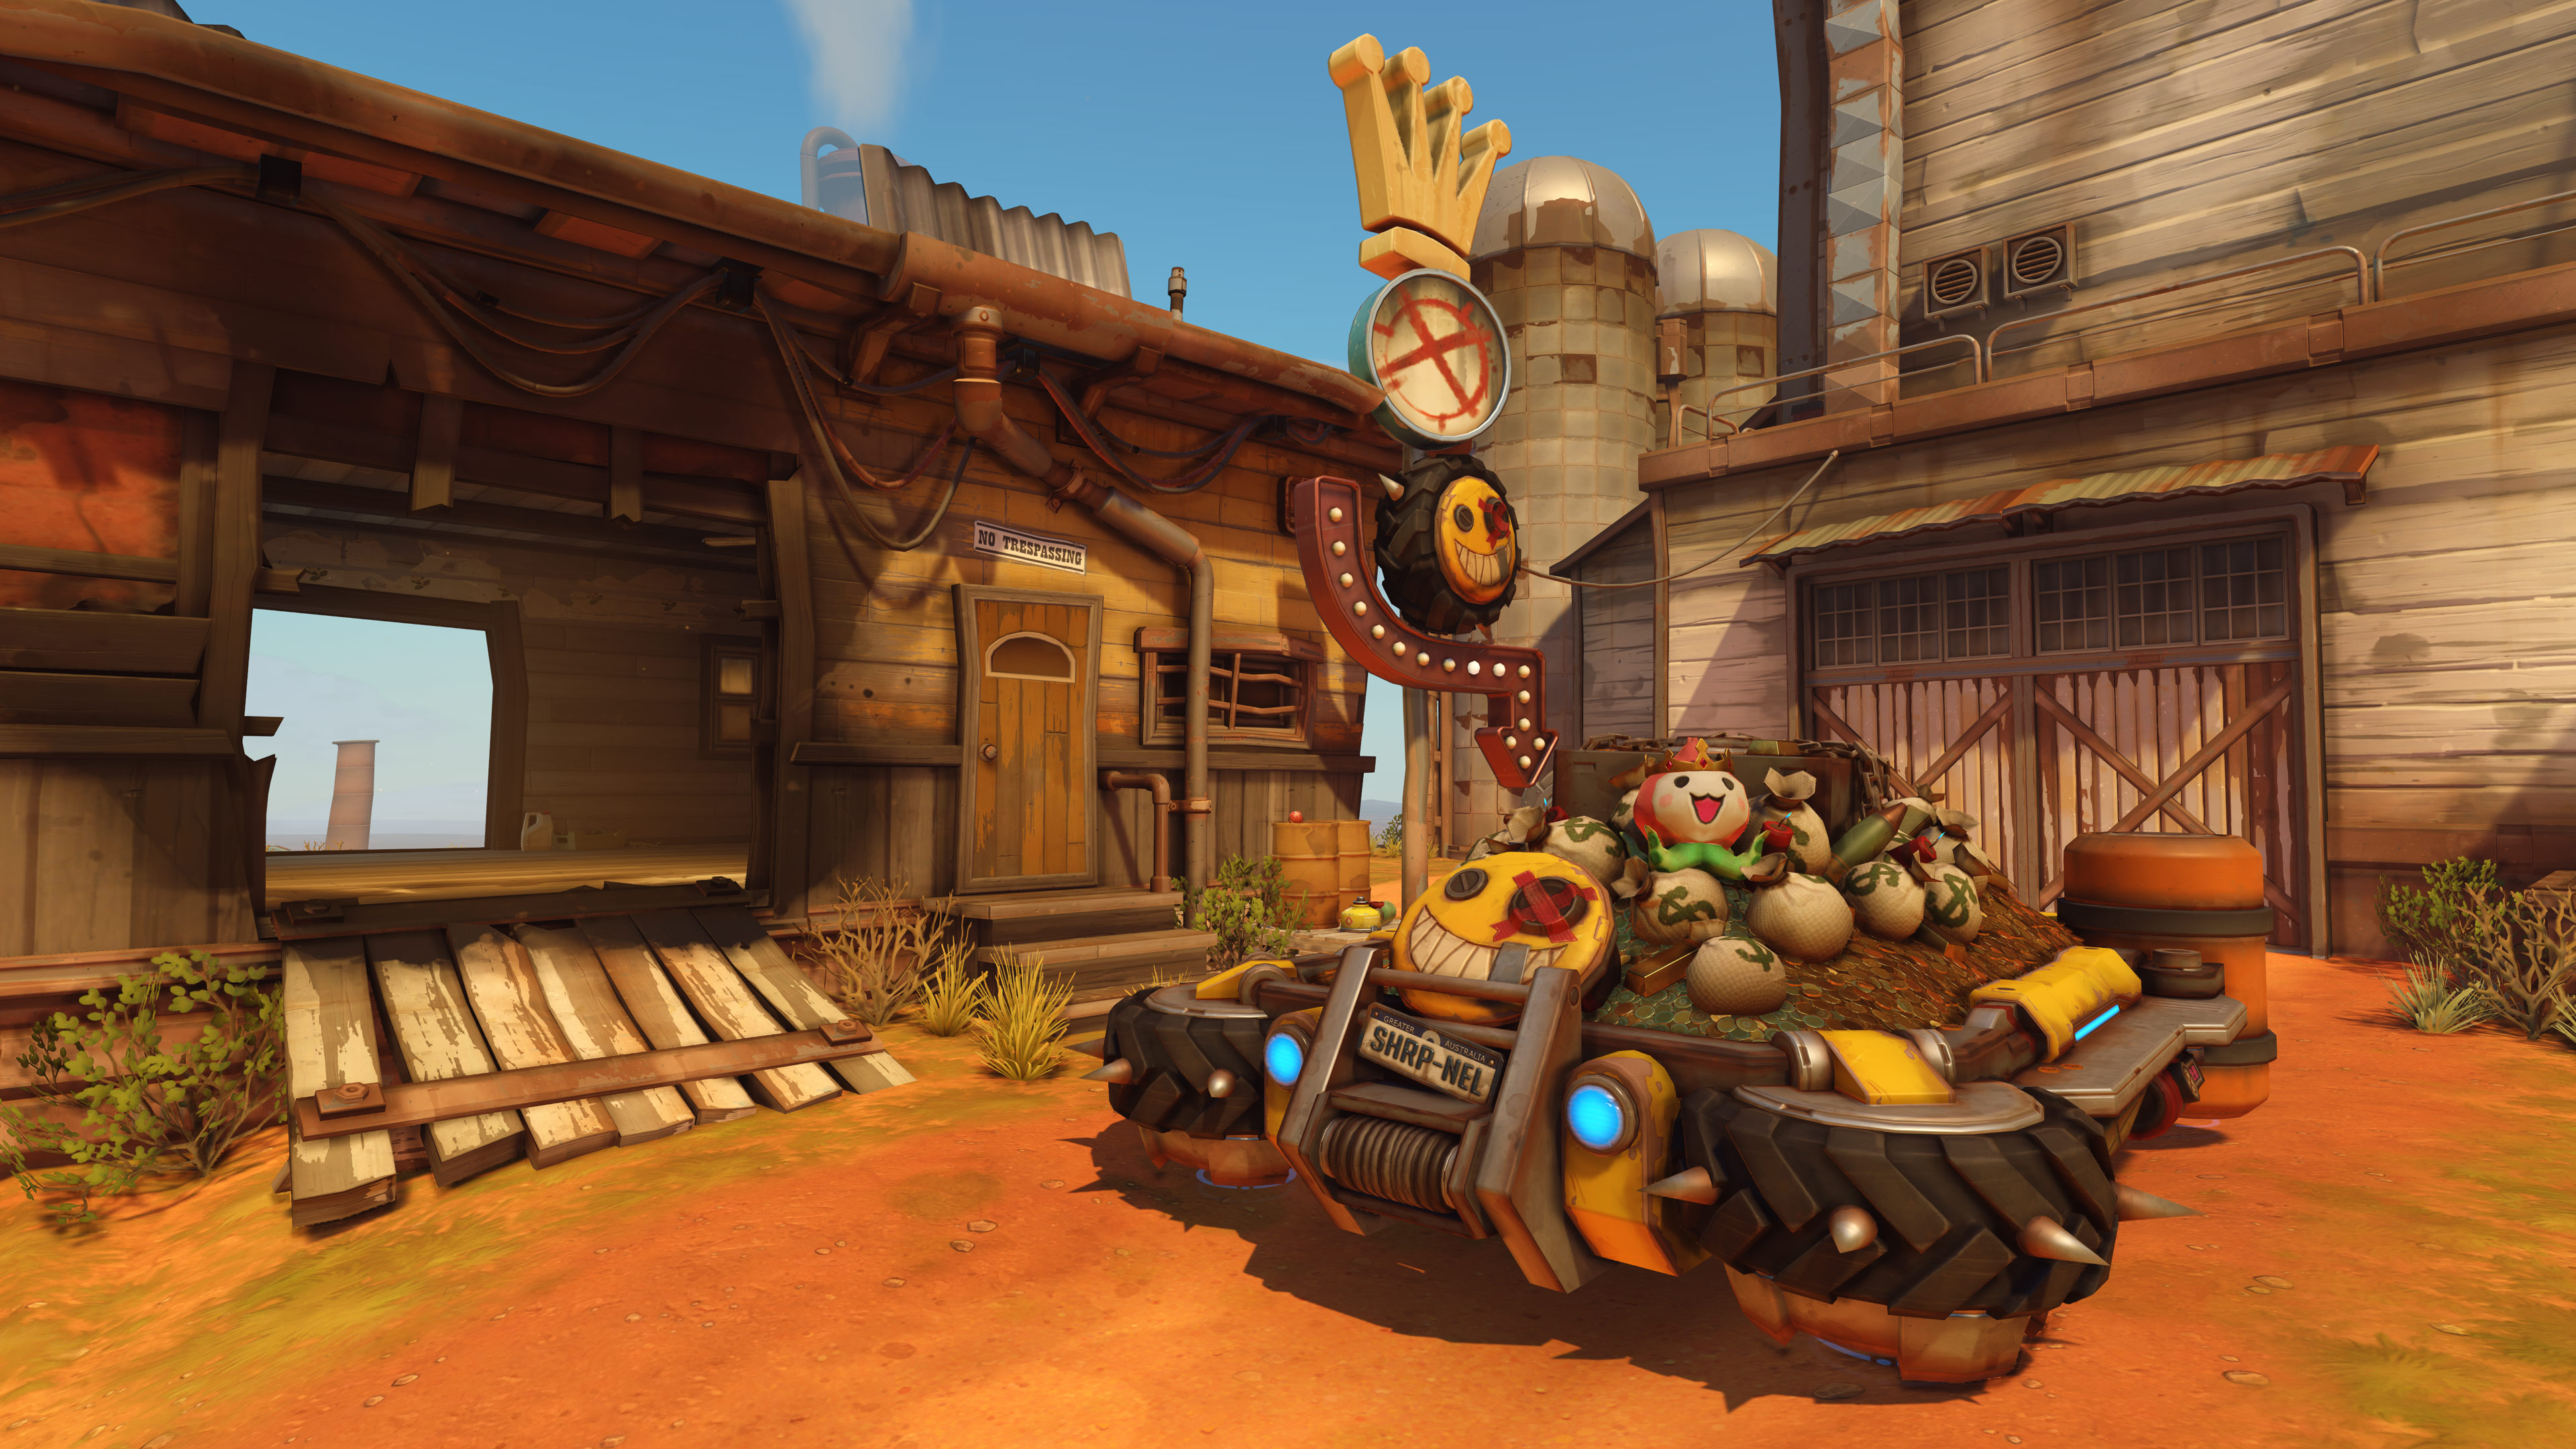 New Overwatch Map, Junkertown Announced